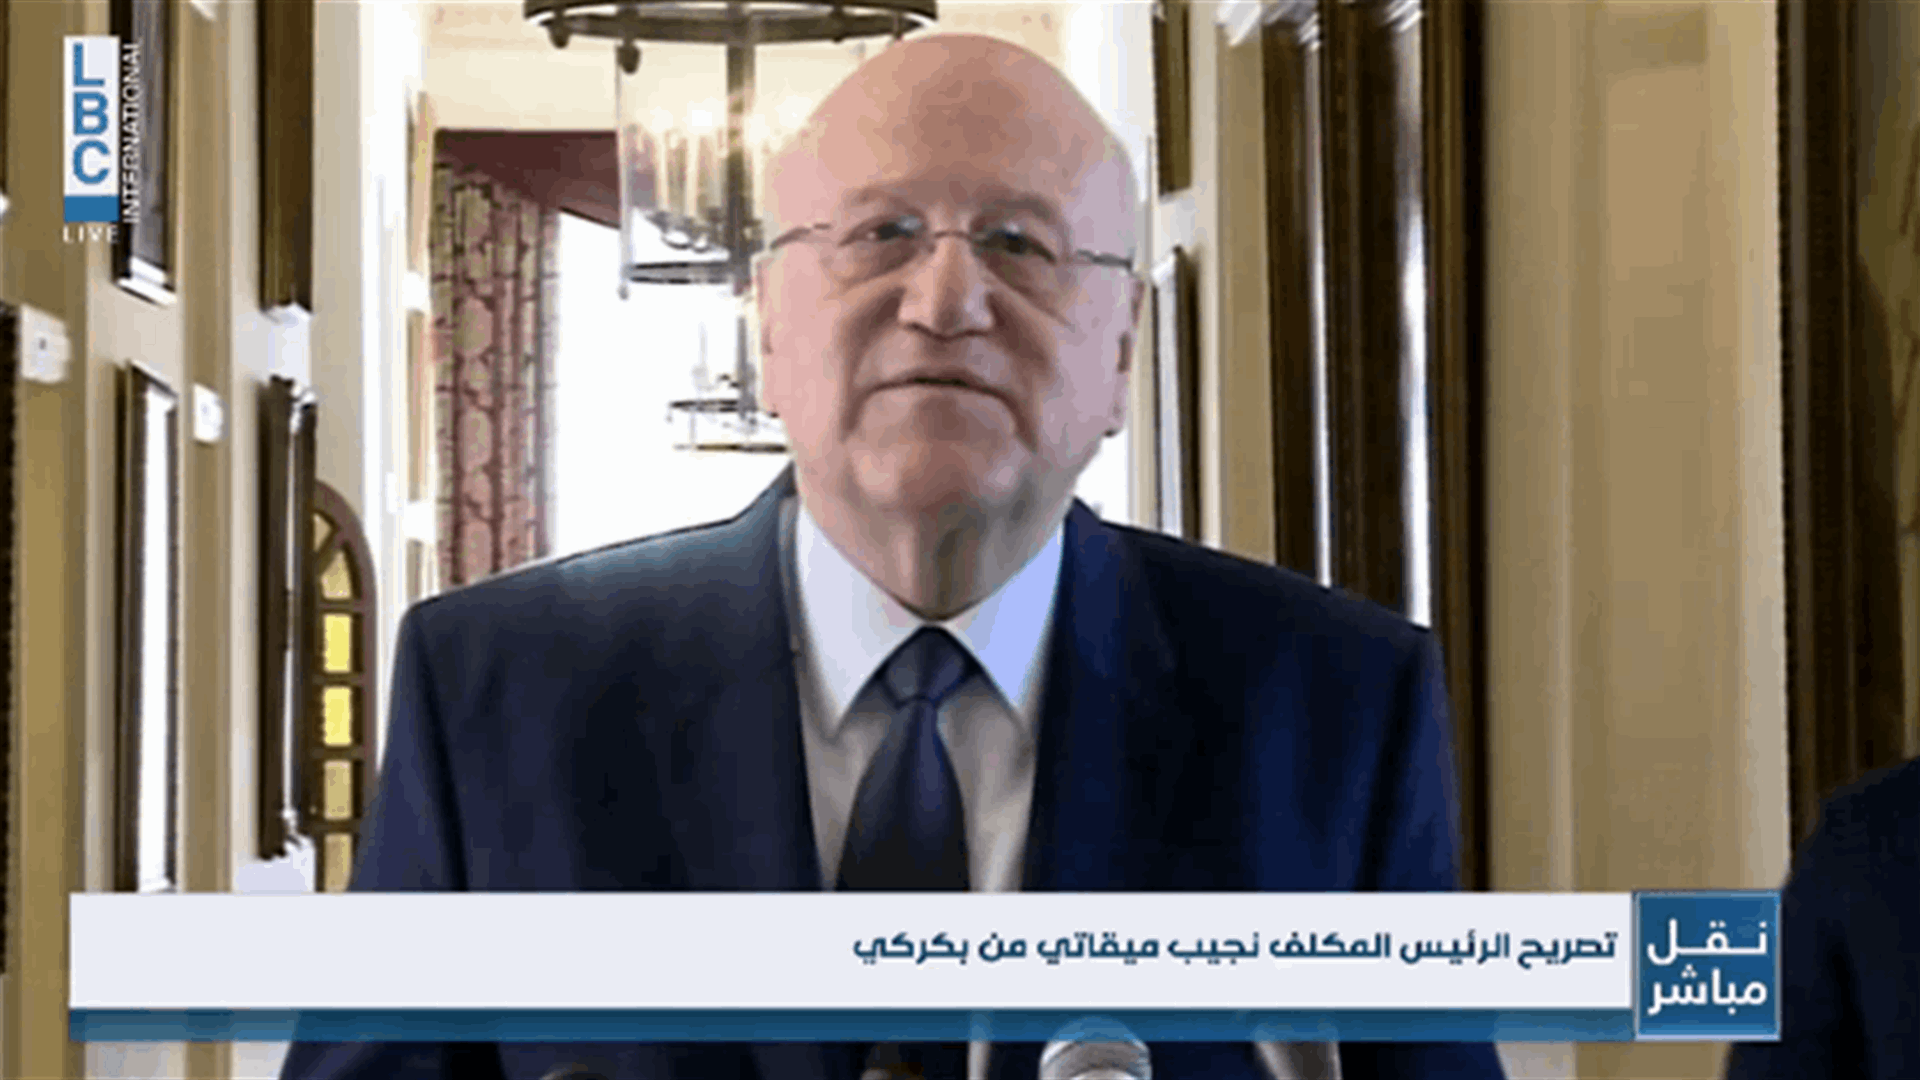 Mikati from Bkerki: When we make a united decision, we can achieve what we all want